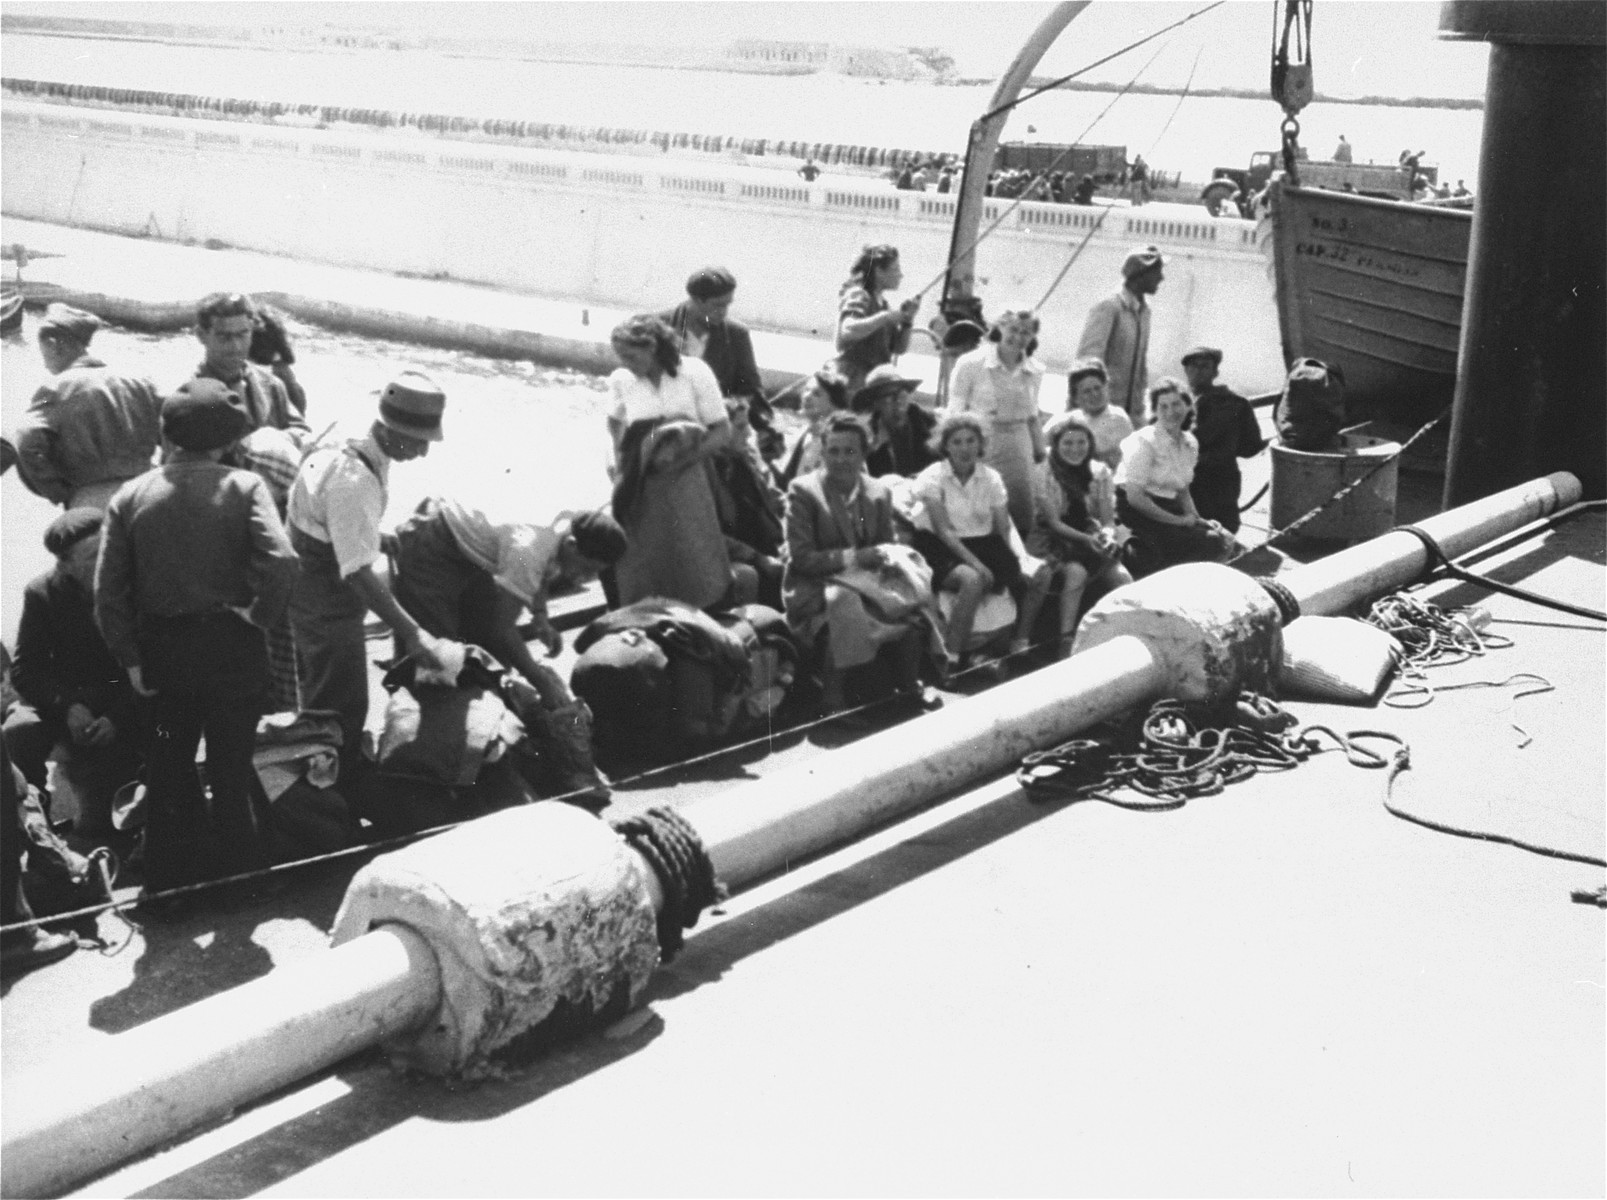 Exodus 1947 refugees on board the President Warfield, which is docked at a quay in Sete's harbor.